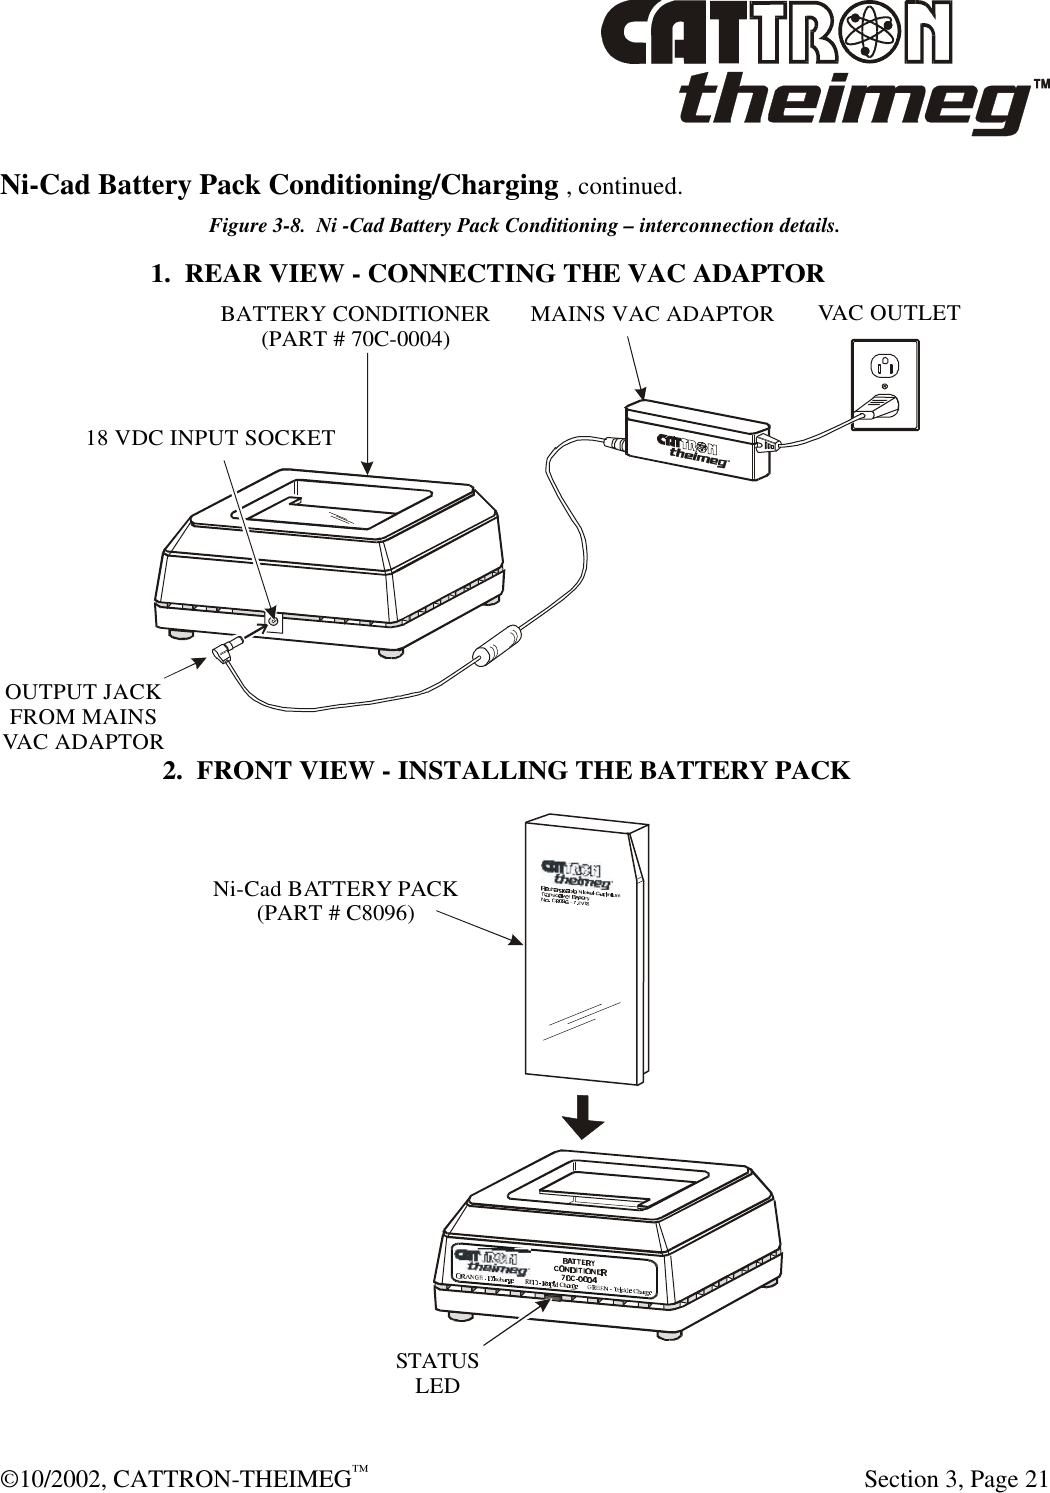  ©10/2002, CATTRON-THEIMEG™   Section 3, Page 21 Ni-Cad Battery Pack Conditioning/Charging , continued. Figure 3-8.  Ni -Cad Battery Pack Conditioning – interconnection details. 1.  REAR VIEW - CONNECTING THE VAC ADAPTOR2.  FRONT VIEW - INSTALLING THE BATTERY PACKOUTPUT JACKFROM MAINSVAC ADAPTORMAINS VAC ADAPTORVAC OUTLET18 VDC INPUT SOCKETBATTERY CONDITIONER(PART # 70C-0004)STATUSLEDNi-Cad BATTERY PACK(PART # C8096)  